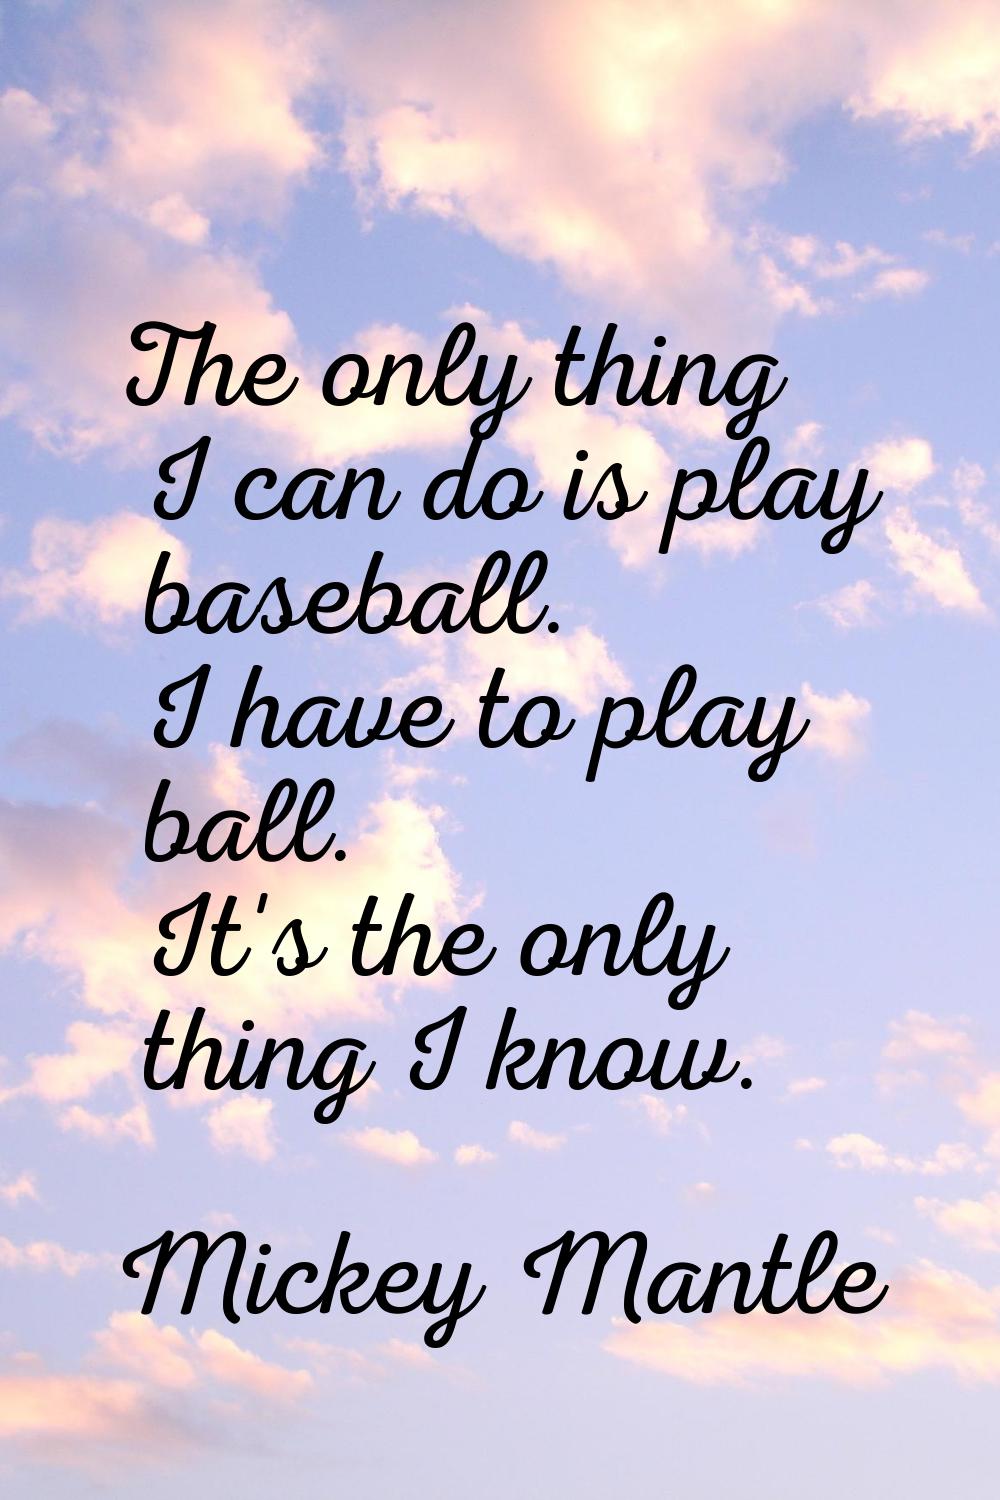 The only thing I can do is play baseball. I have to play ball. It's the only thing I know.